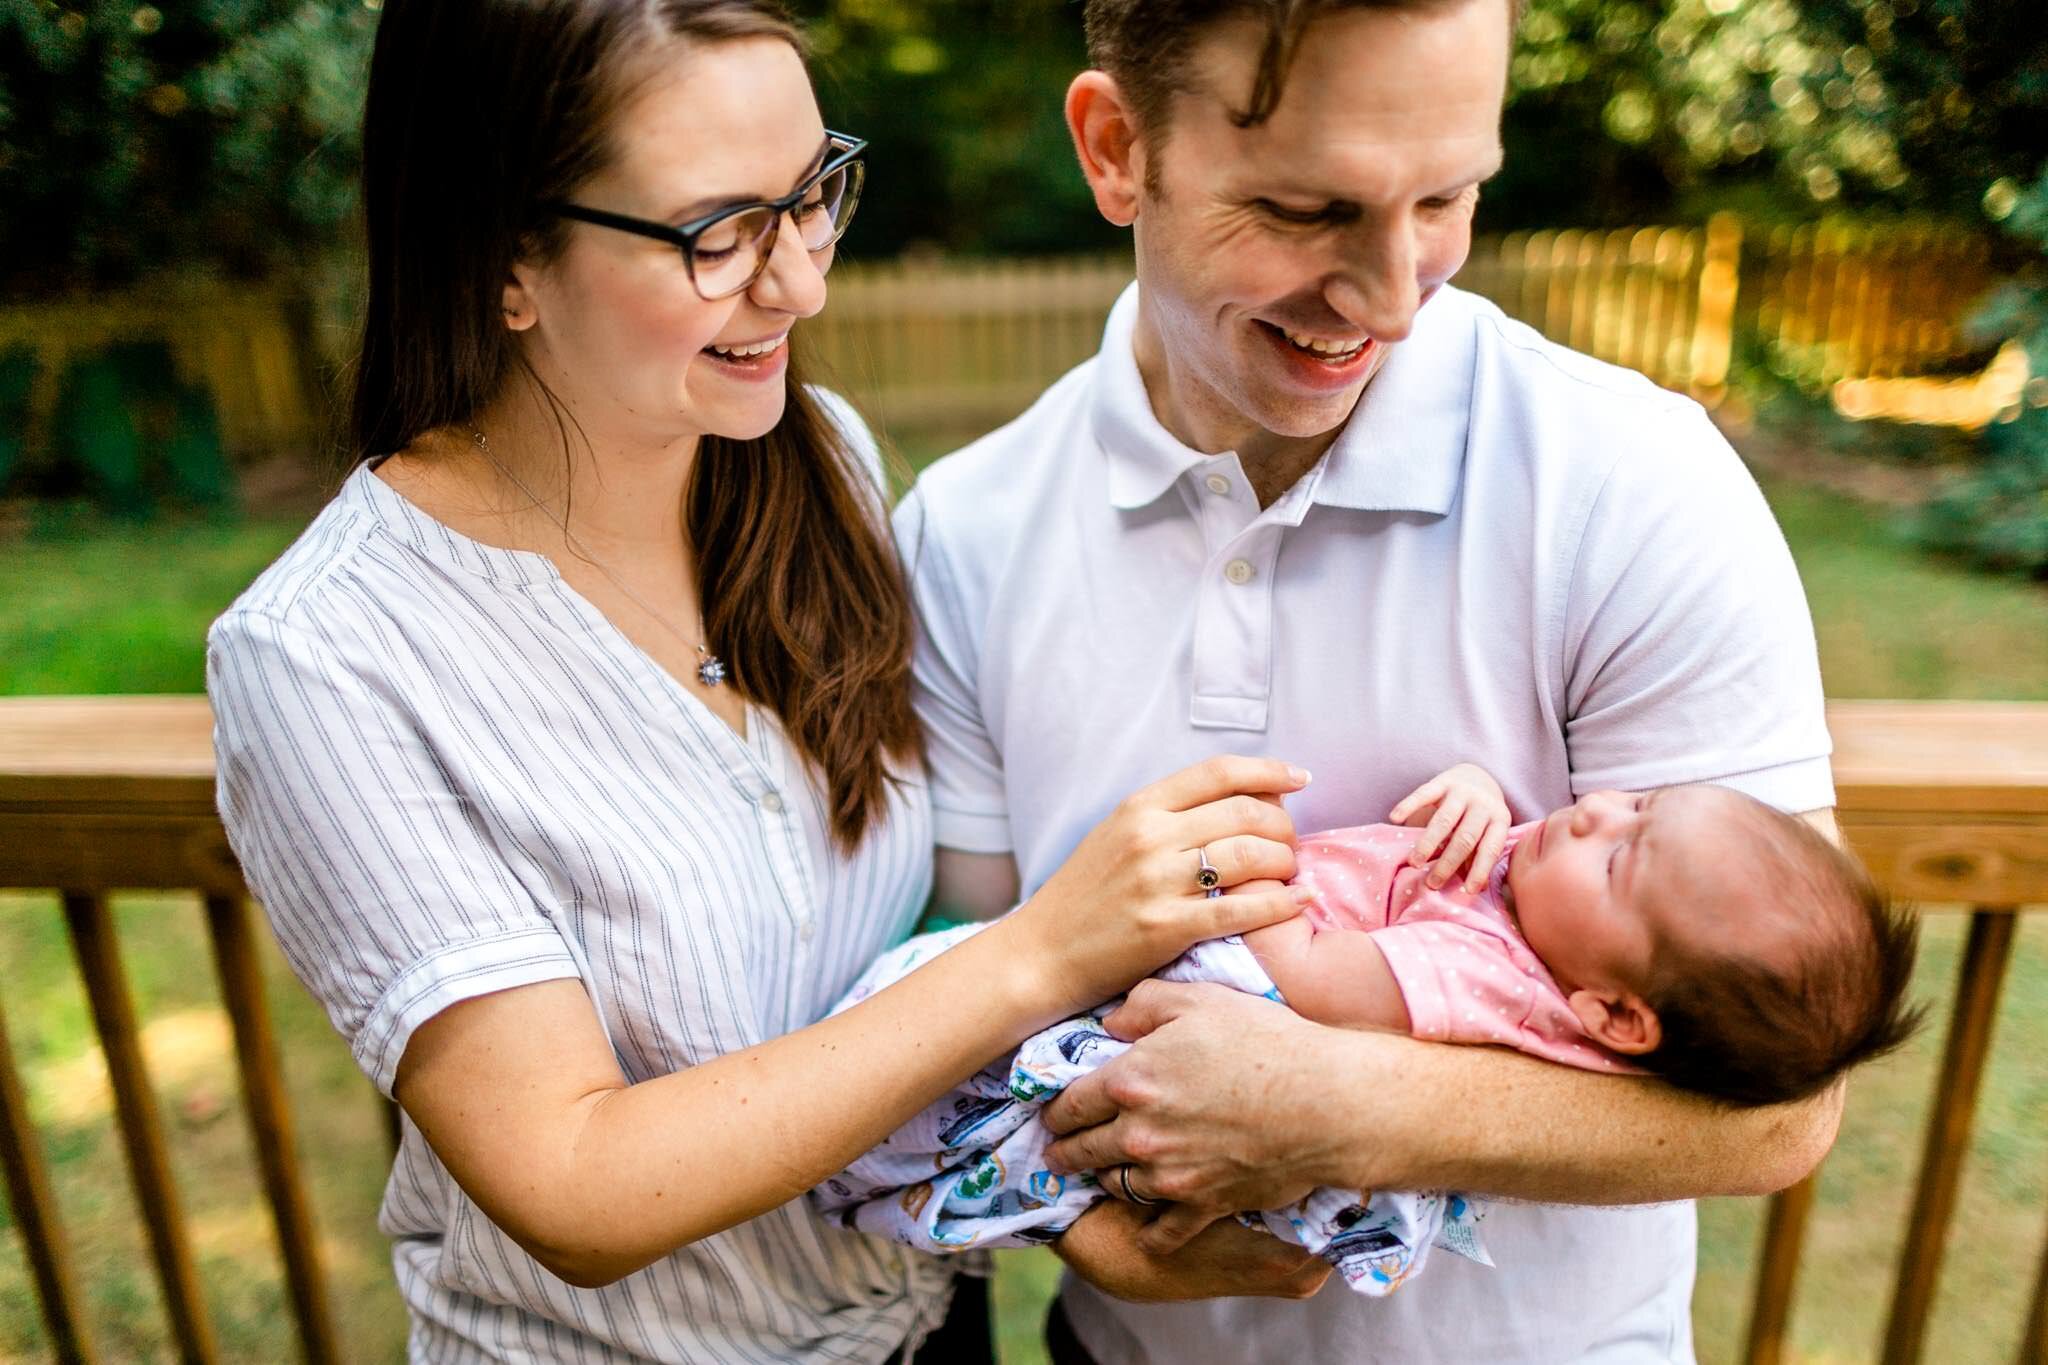 Raleigh Newborn Photographer | By G. Lin Photography | New parents laughing and smiling at baby girl